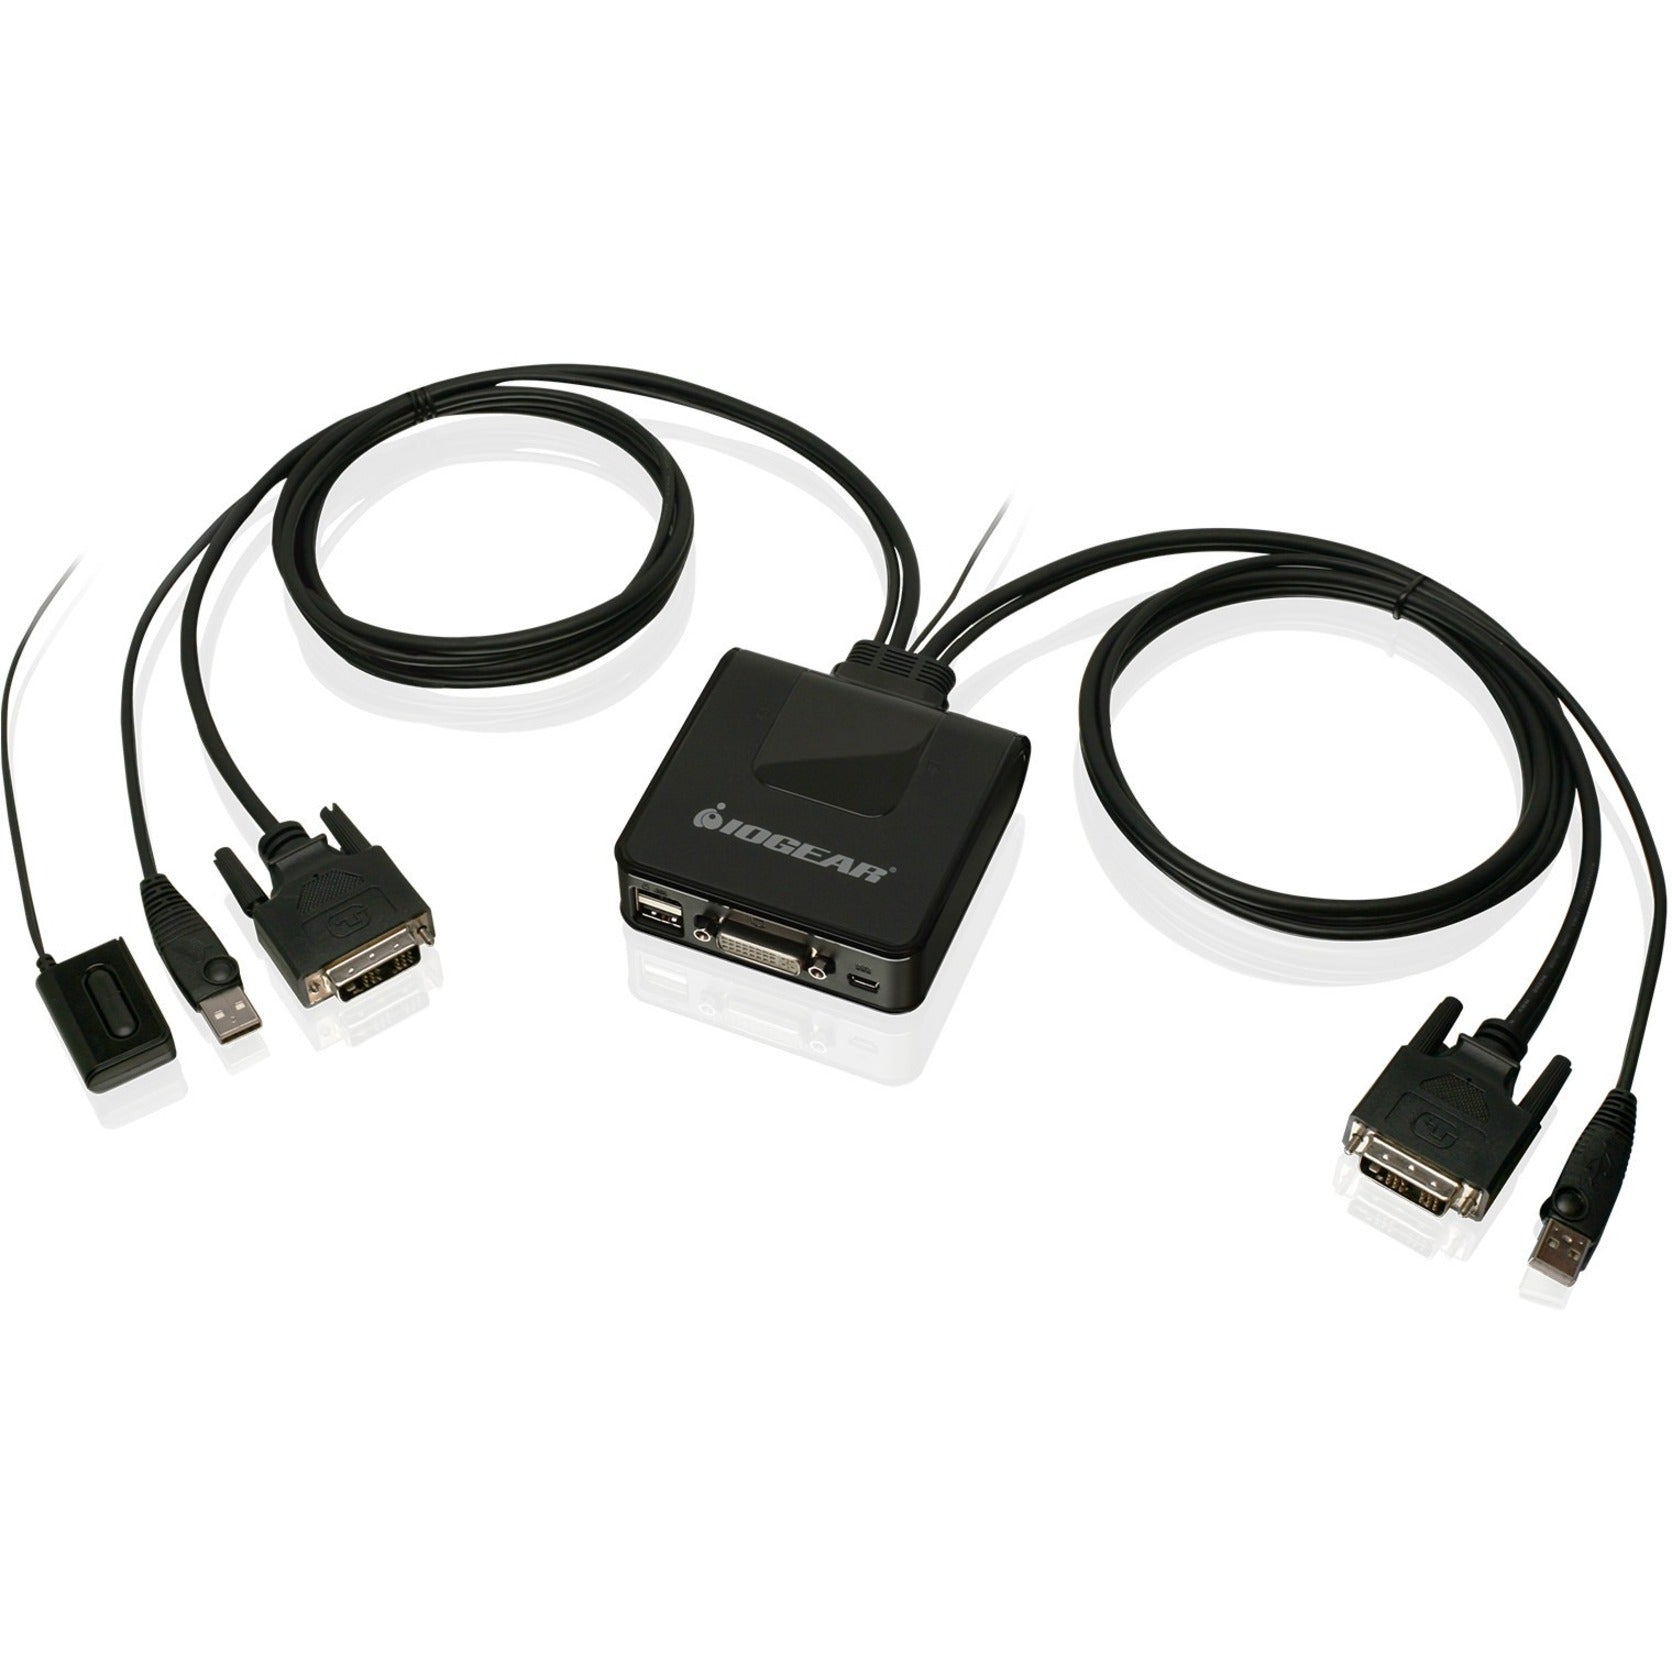 IOGEAR GCS922U 2-Port USB DVI Cable KVM Switch, Easy Computer Control and Switching